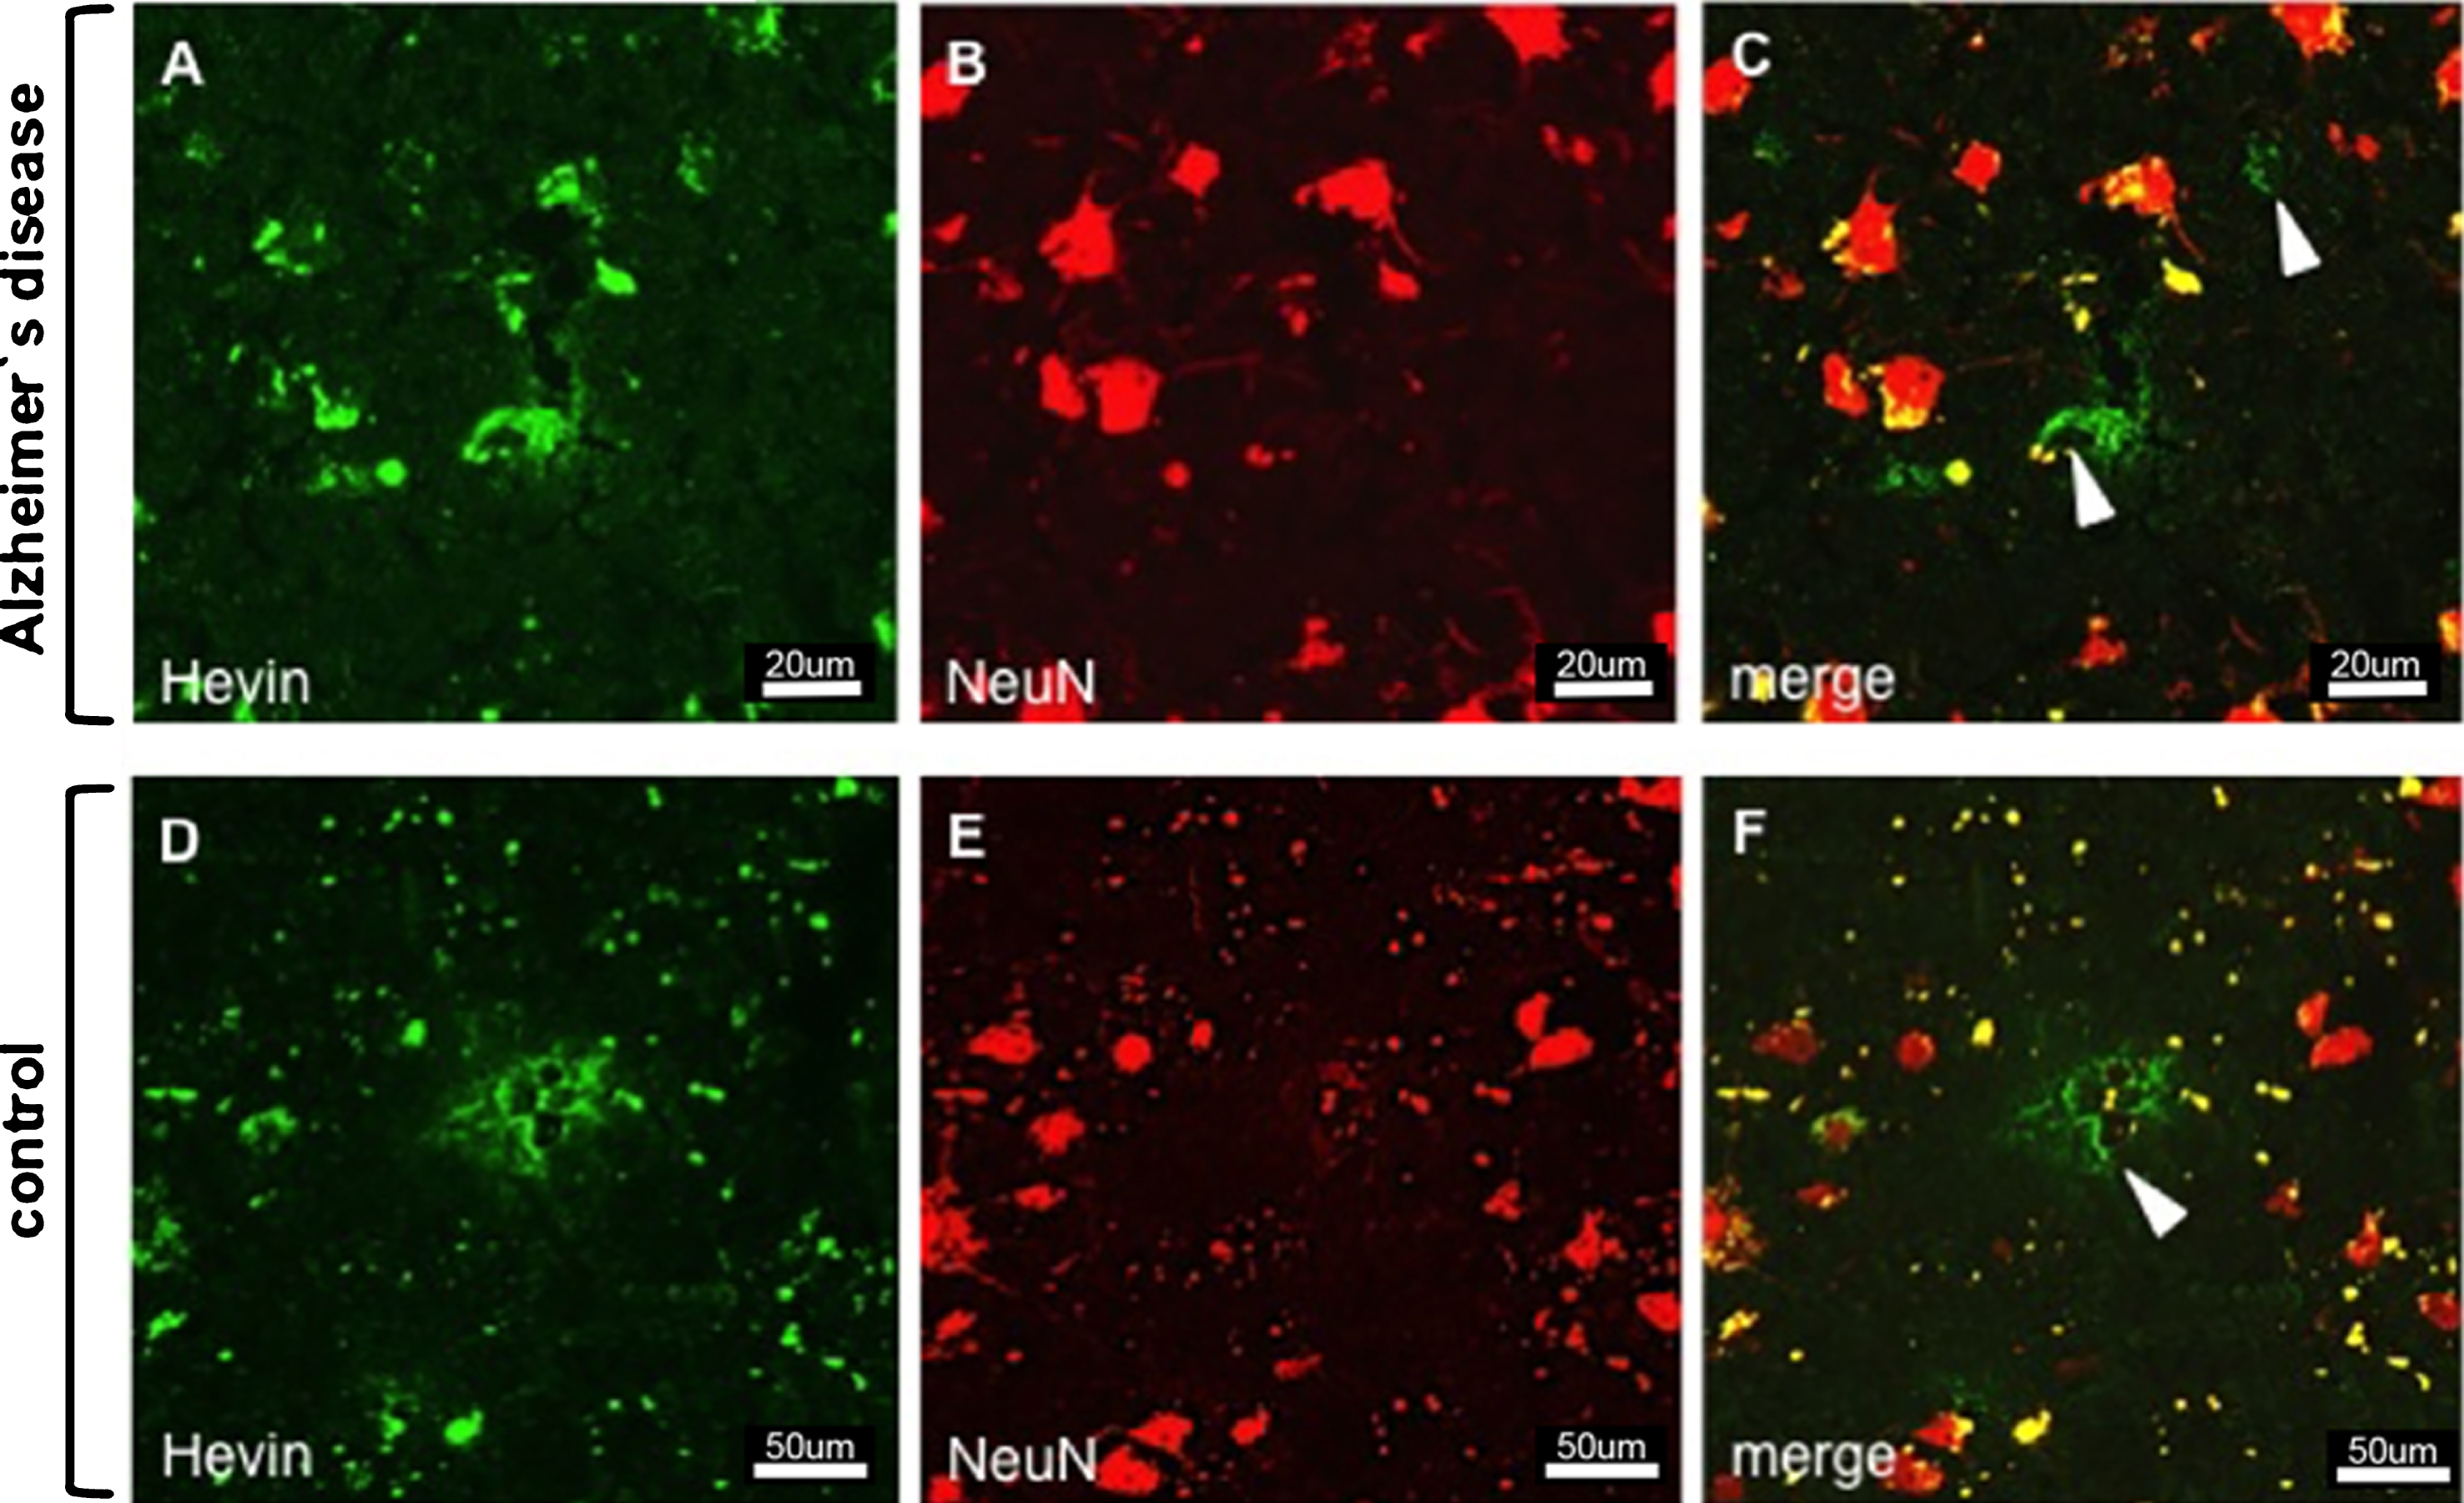 Immunostaining of Hevin and neurons in AD (images A–C) and control tissue (images D–F). Despite the proposal that Hevin is expressed by neurons, all of the images show cell types (arrowheads) other than neurons.